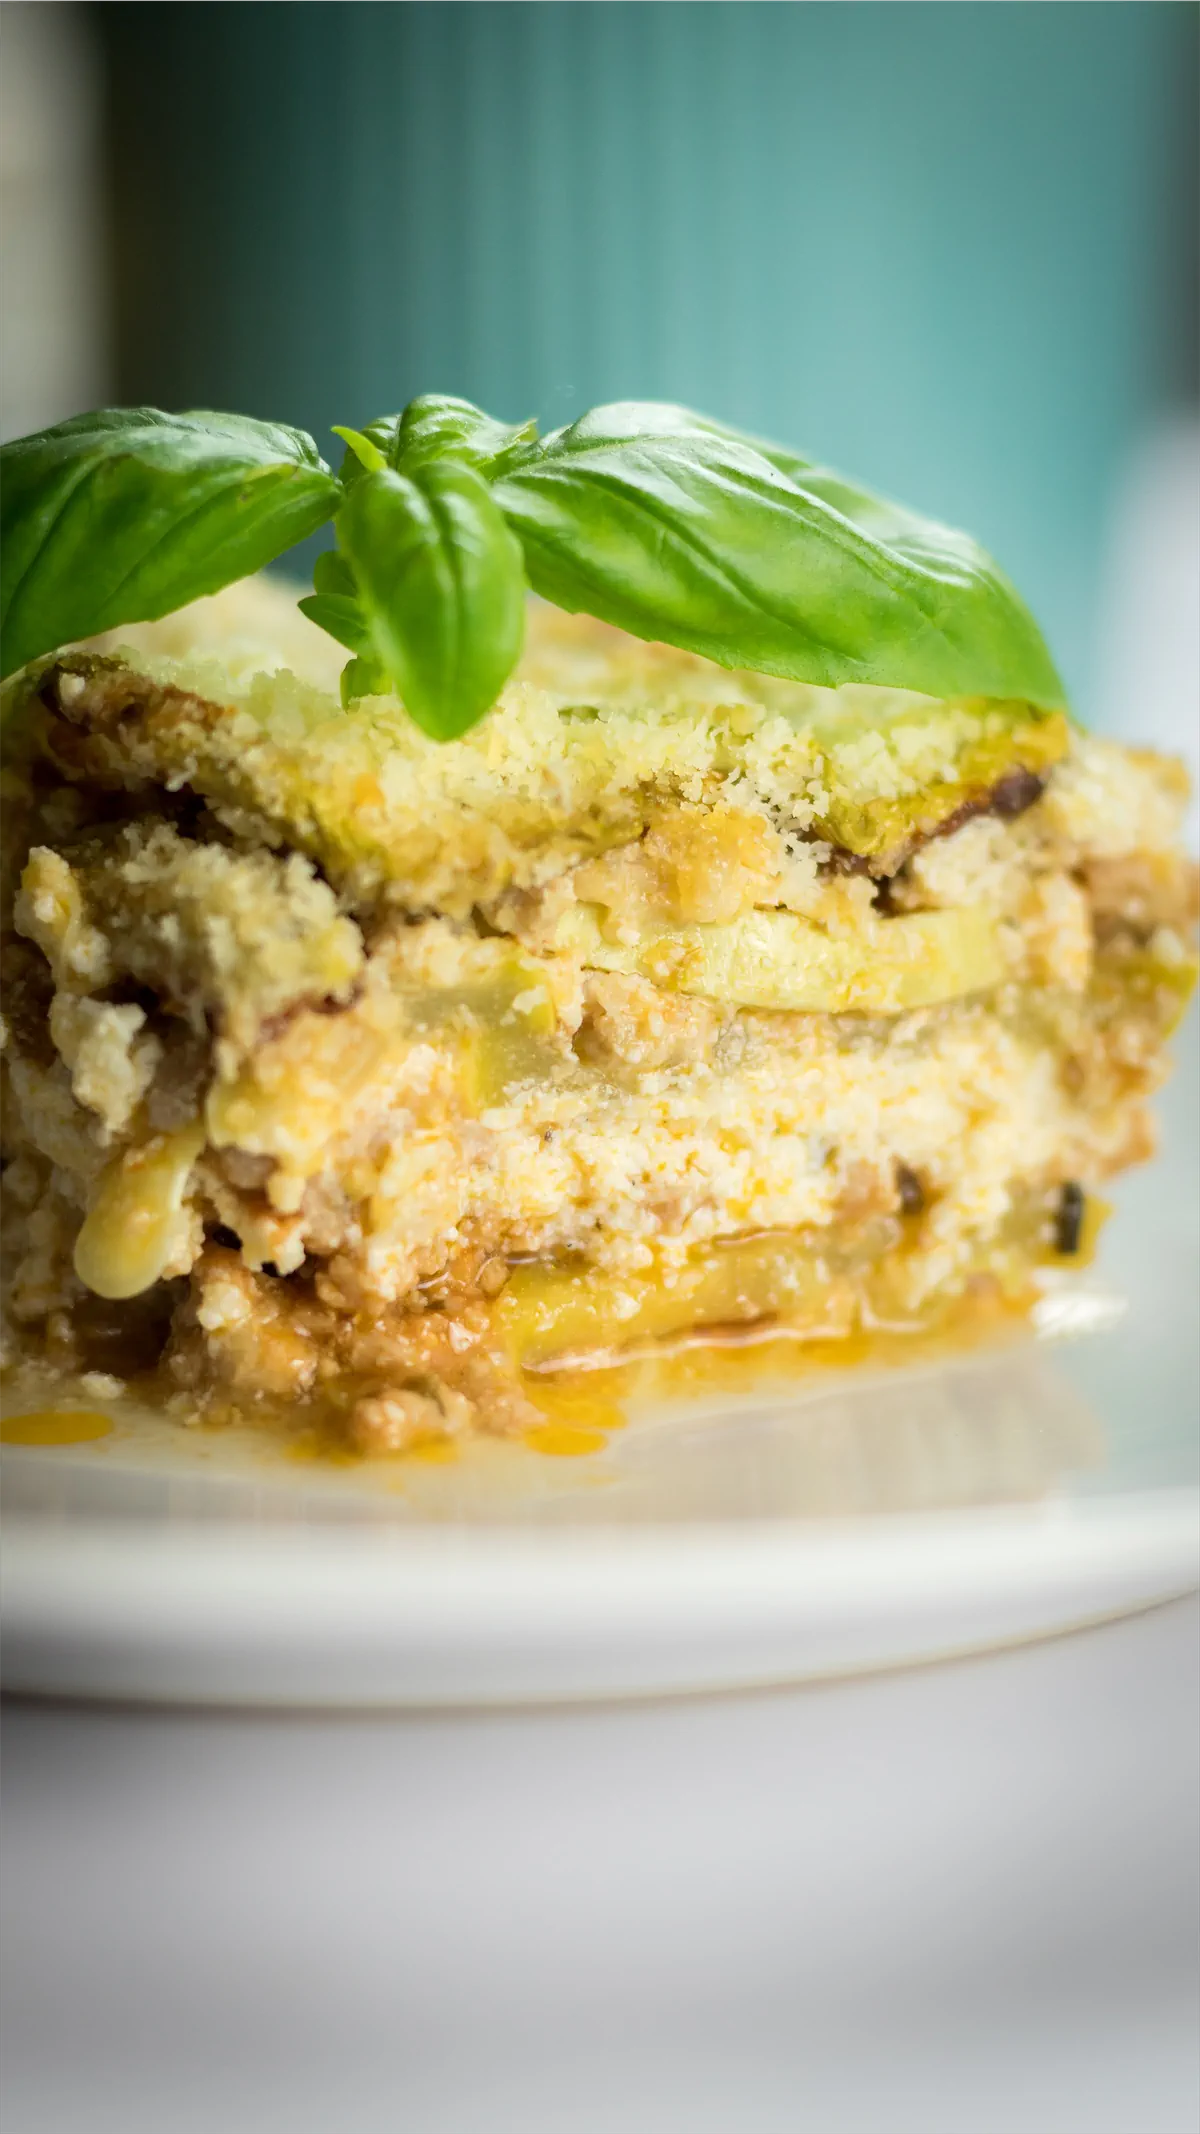 Lasagna with zucchini served on a plate, showcasing its distinct layers.